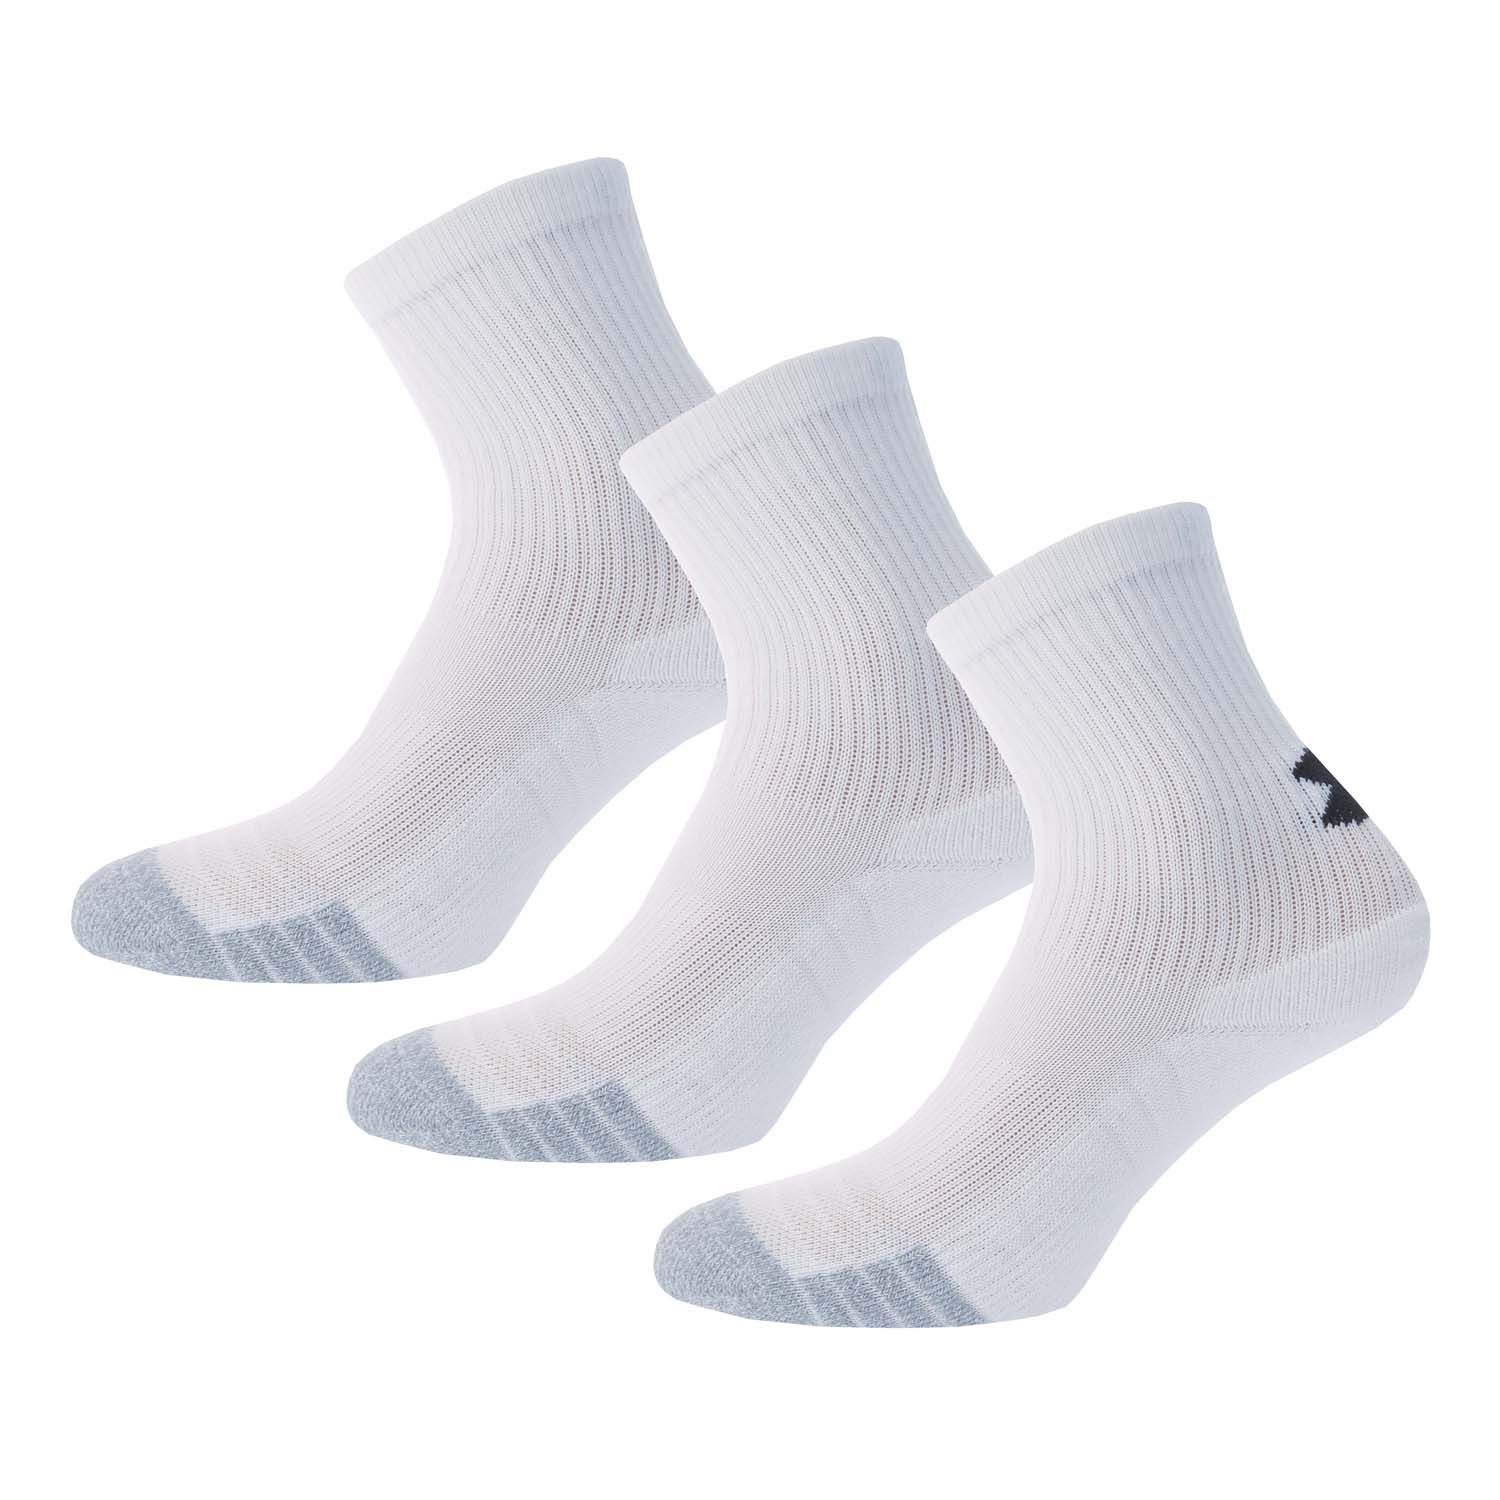 Boys Under Armour HeatGear 3 Pack Crew Socks in white.- Three pairs per pack. - Crew length.- HeatGear® fabric wicks sweat away from your skin to keep you cool  dry & light.- Dynamic Arch Support helps reduce foot fatigue.- Strategic Cushion reduces bulk  delivers flexibility & breathability.- Mesh panels for added breathability.- 97% Polyester  3% Elastane. - Ref: 1346750101